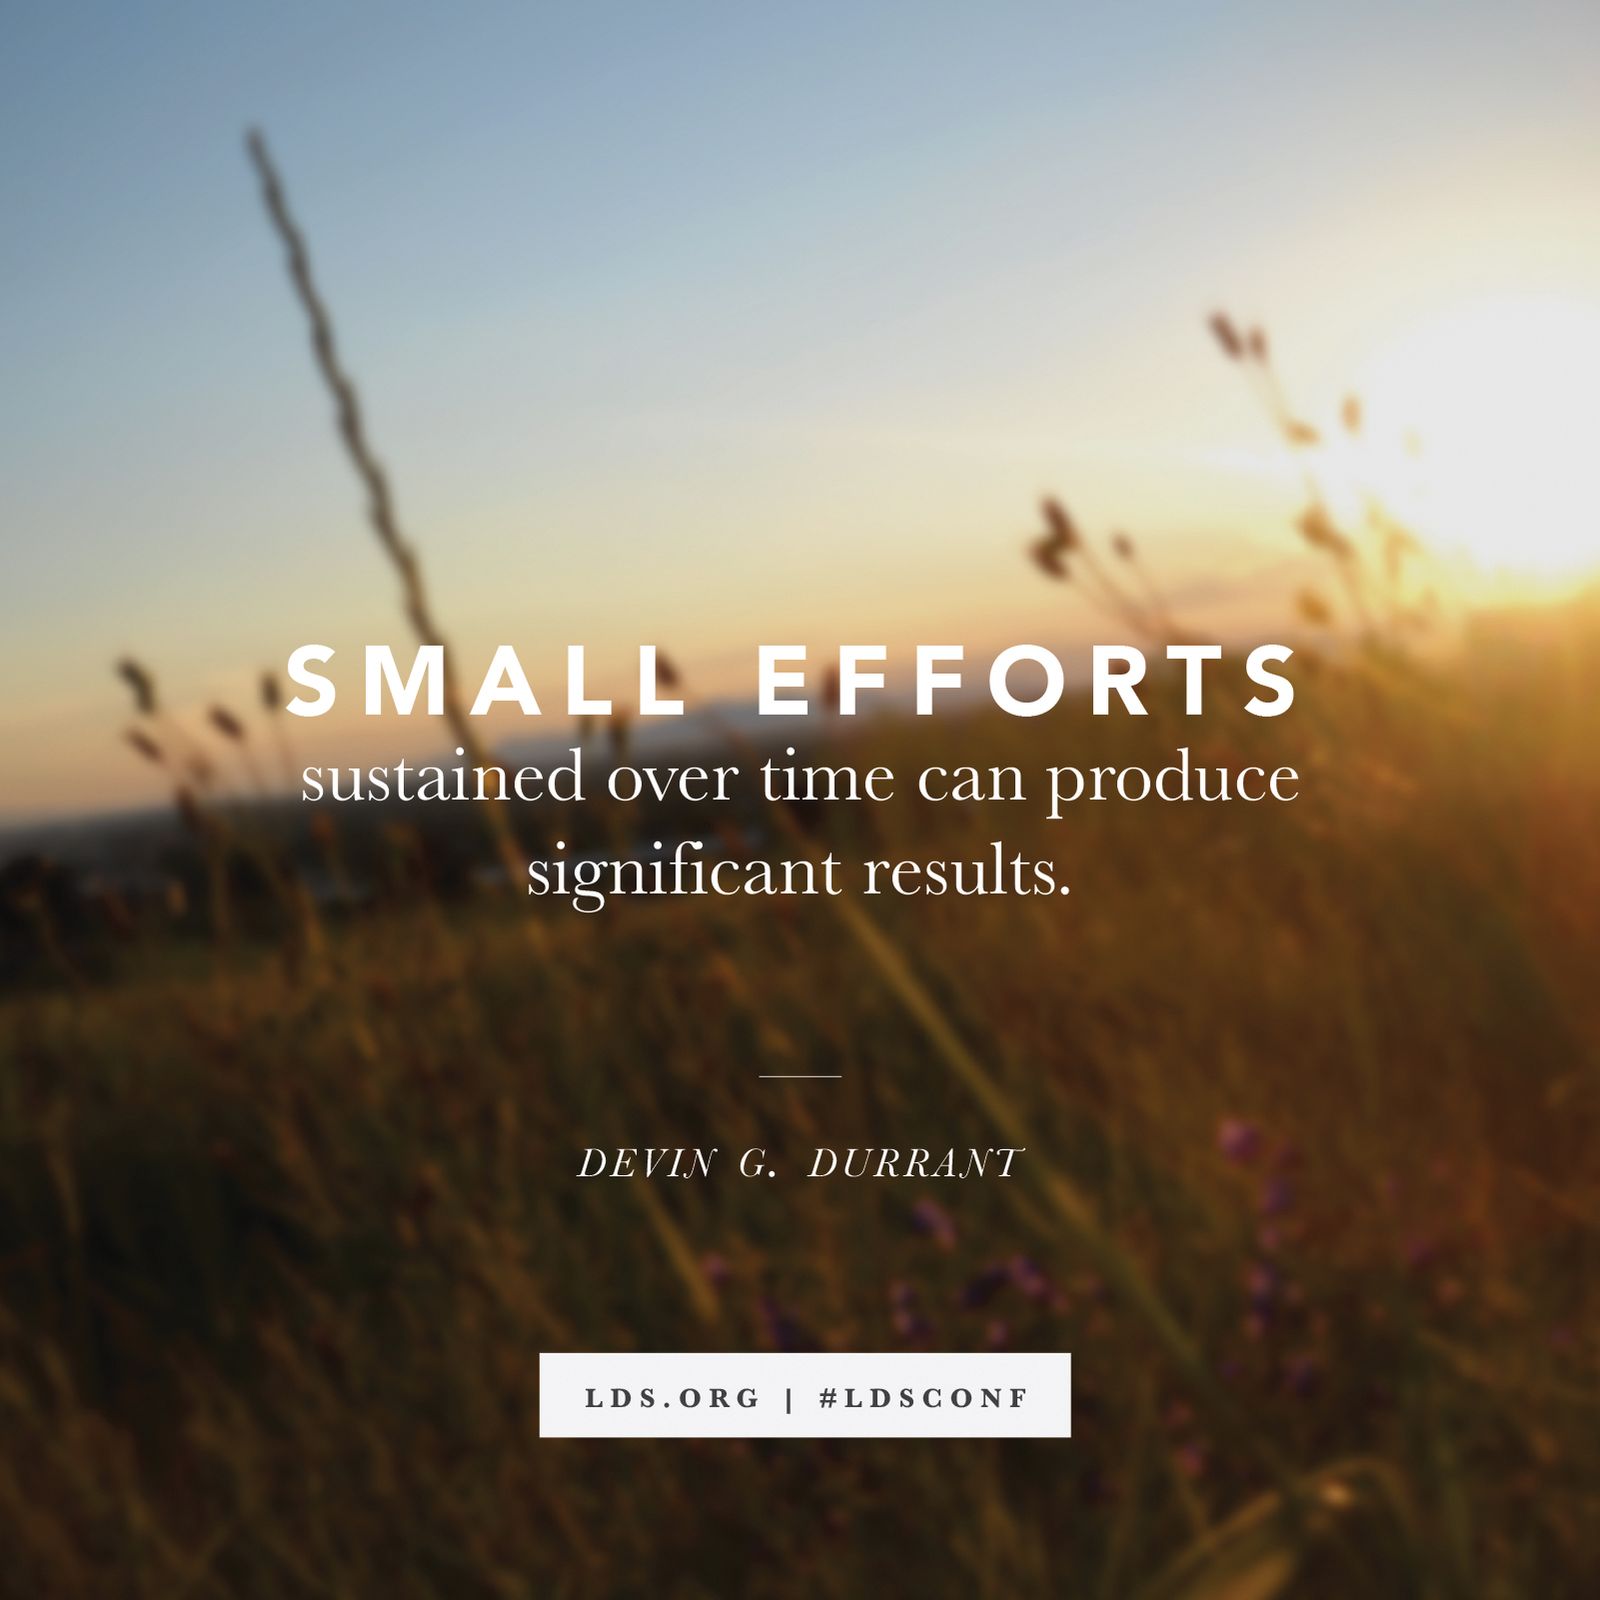 “Small efforts sustained over time can produce significant results.” —Devin G. Durrant, “My Heart Pondereth Them Continually”